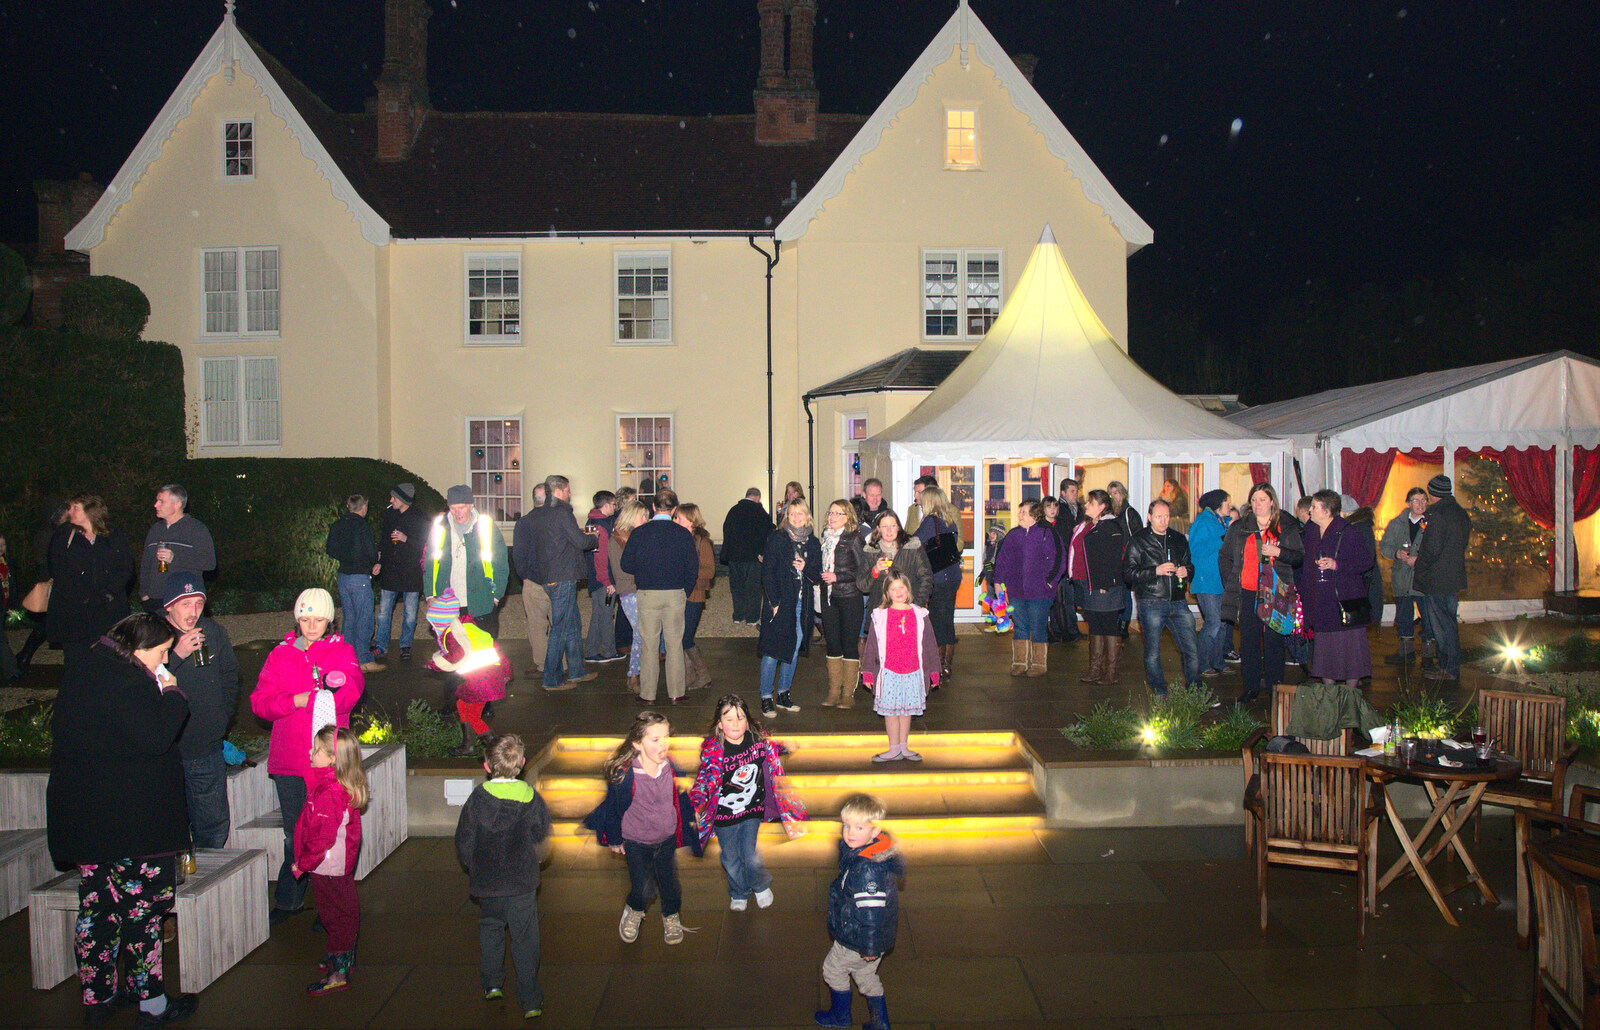 The sunken garden fills up from Rick Wakeman, Ian Lavender and the Christmas lights, The Oaksmere, Suffolk - 4th December 2014